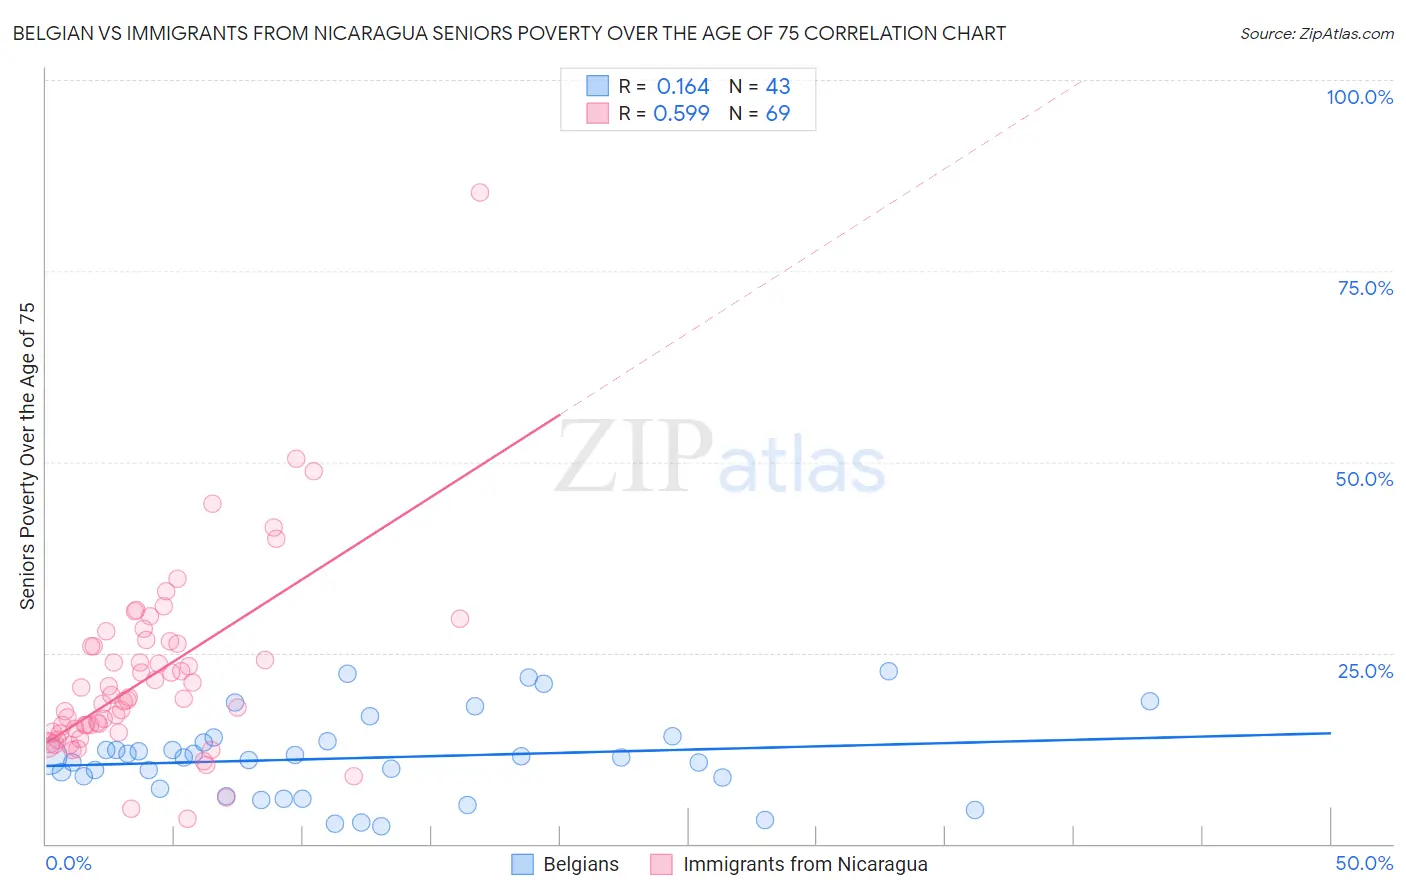 Belgian vs Immigrants from Nicaragua Seniors Poverty Over the Age of 75